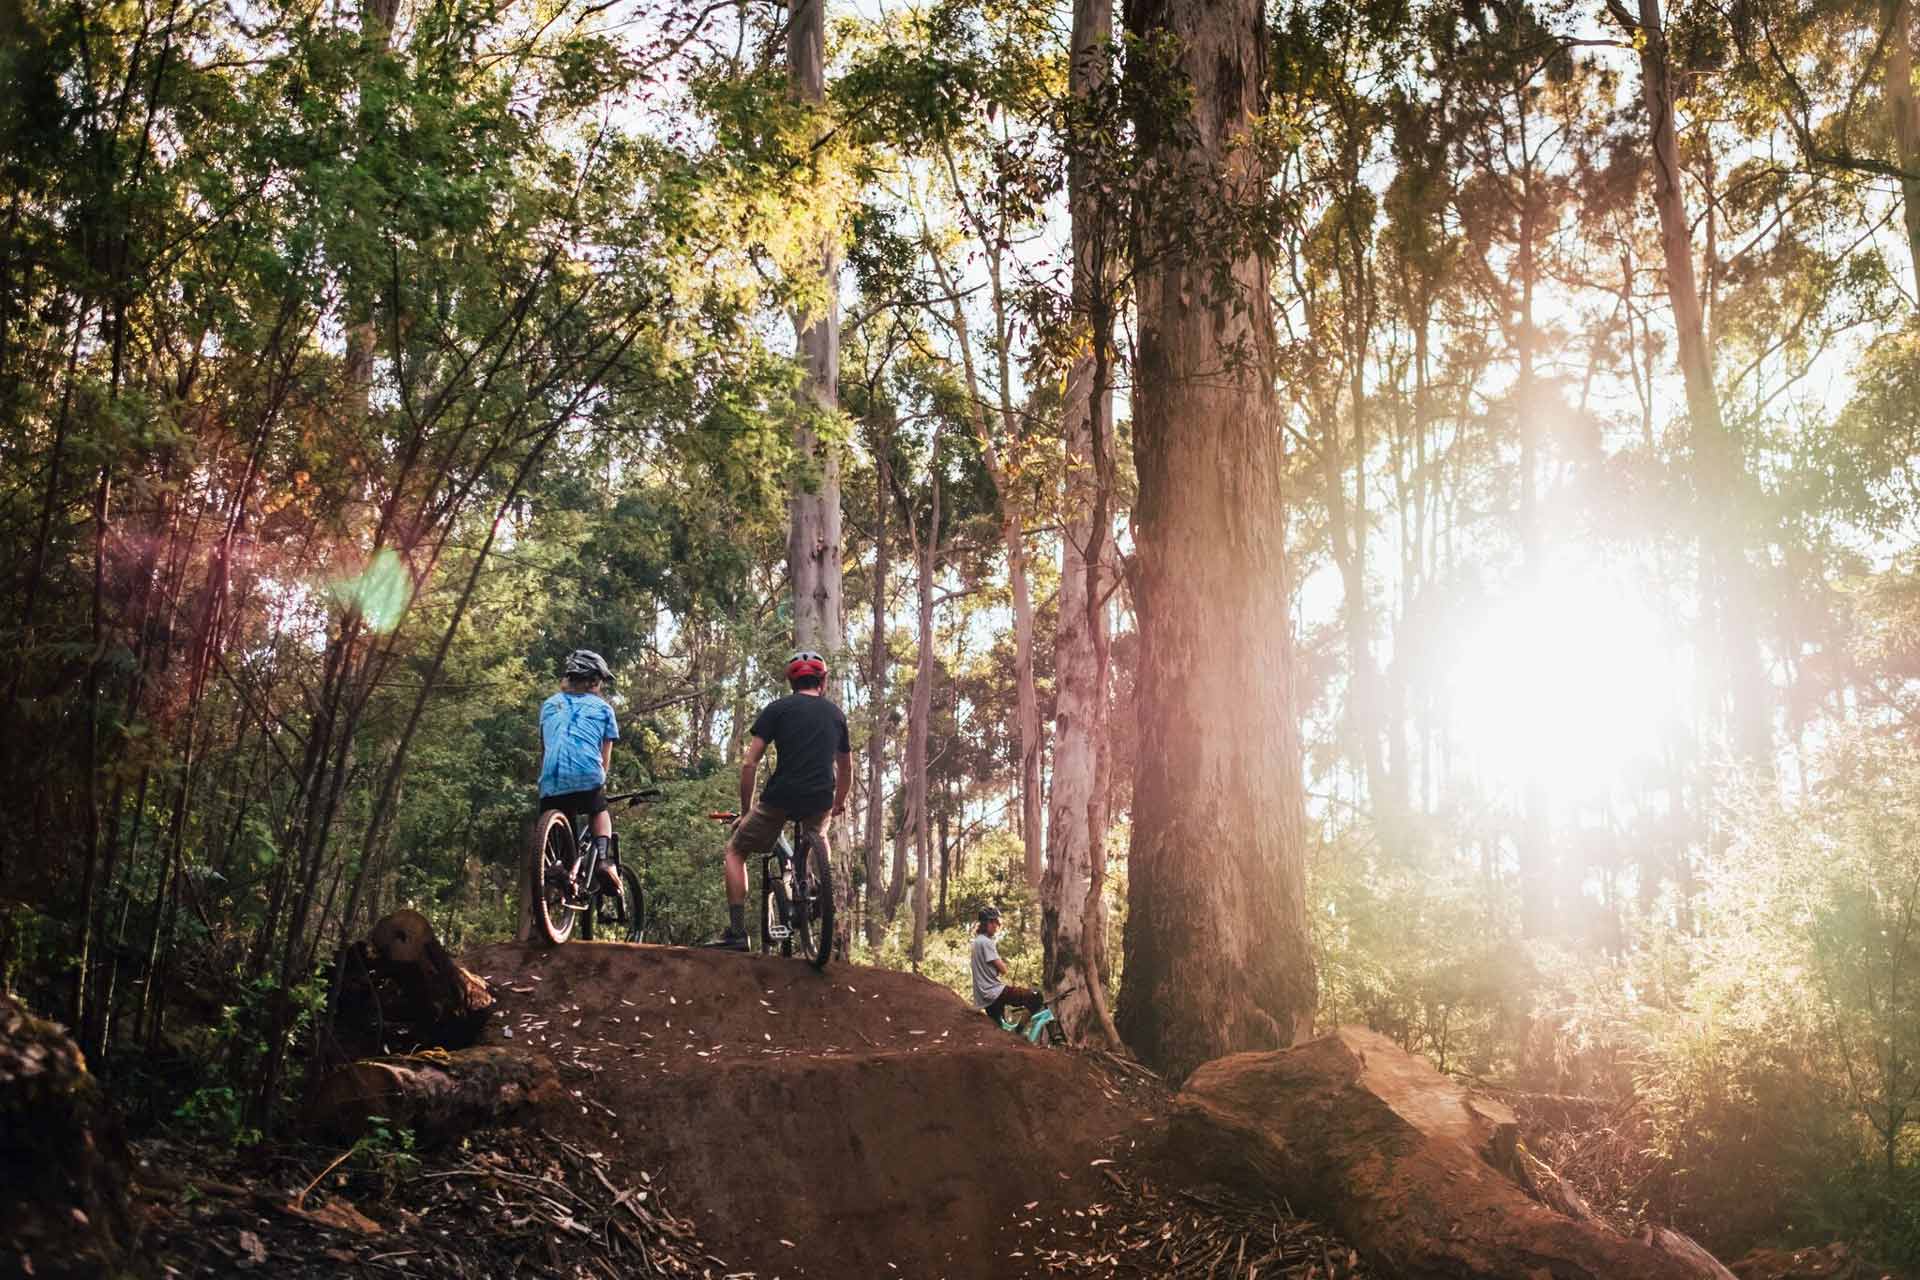 Afternoon sun filtering through trees on mountain bike riders in the pines in Margaret River.